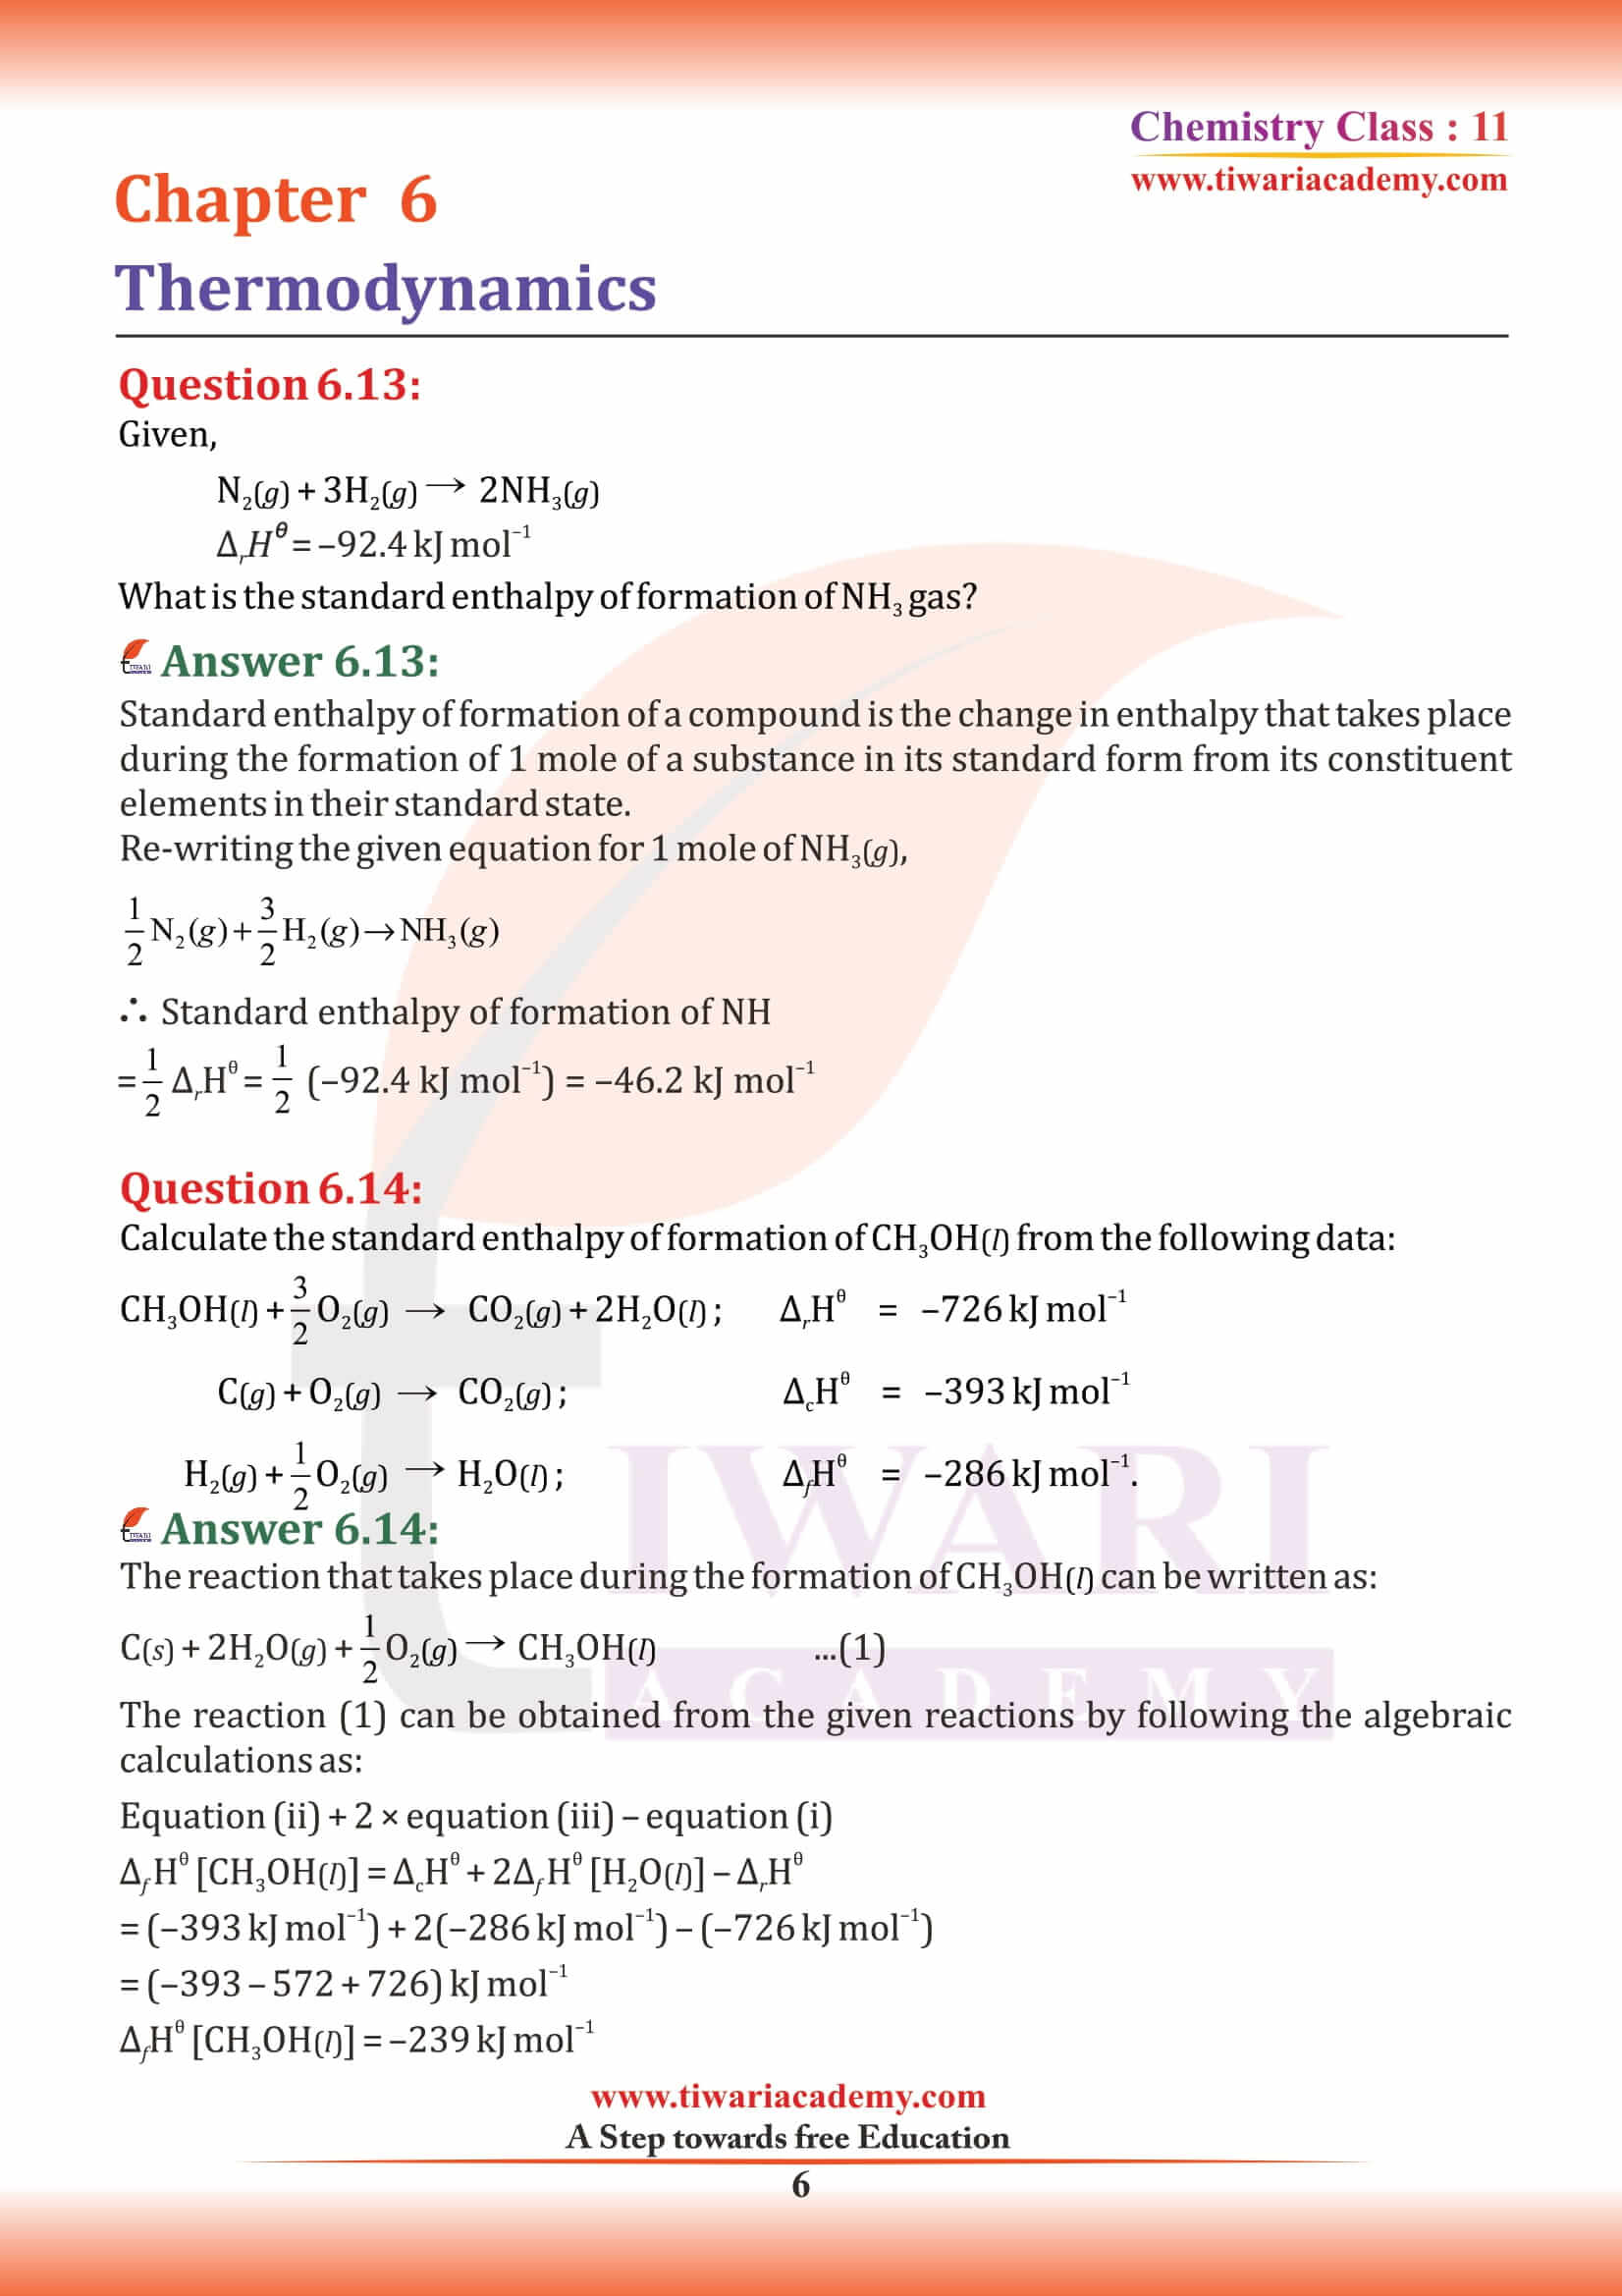 NCERT Solutions for Class 11 Chemistry Chapter 6 extra questions